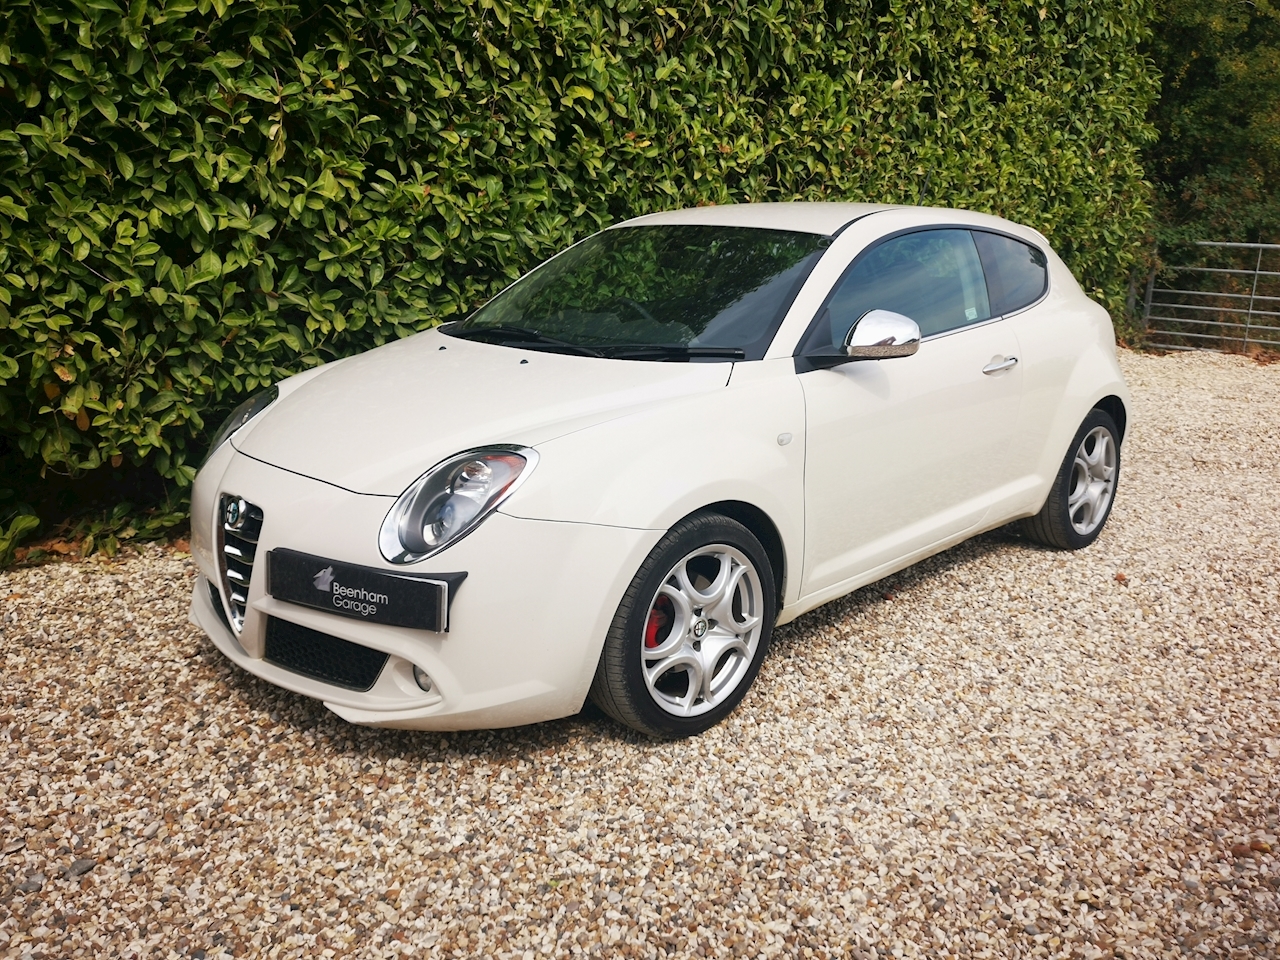 alfa romeo mito used – Search for your used car on the parking